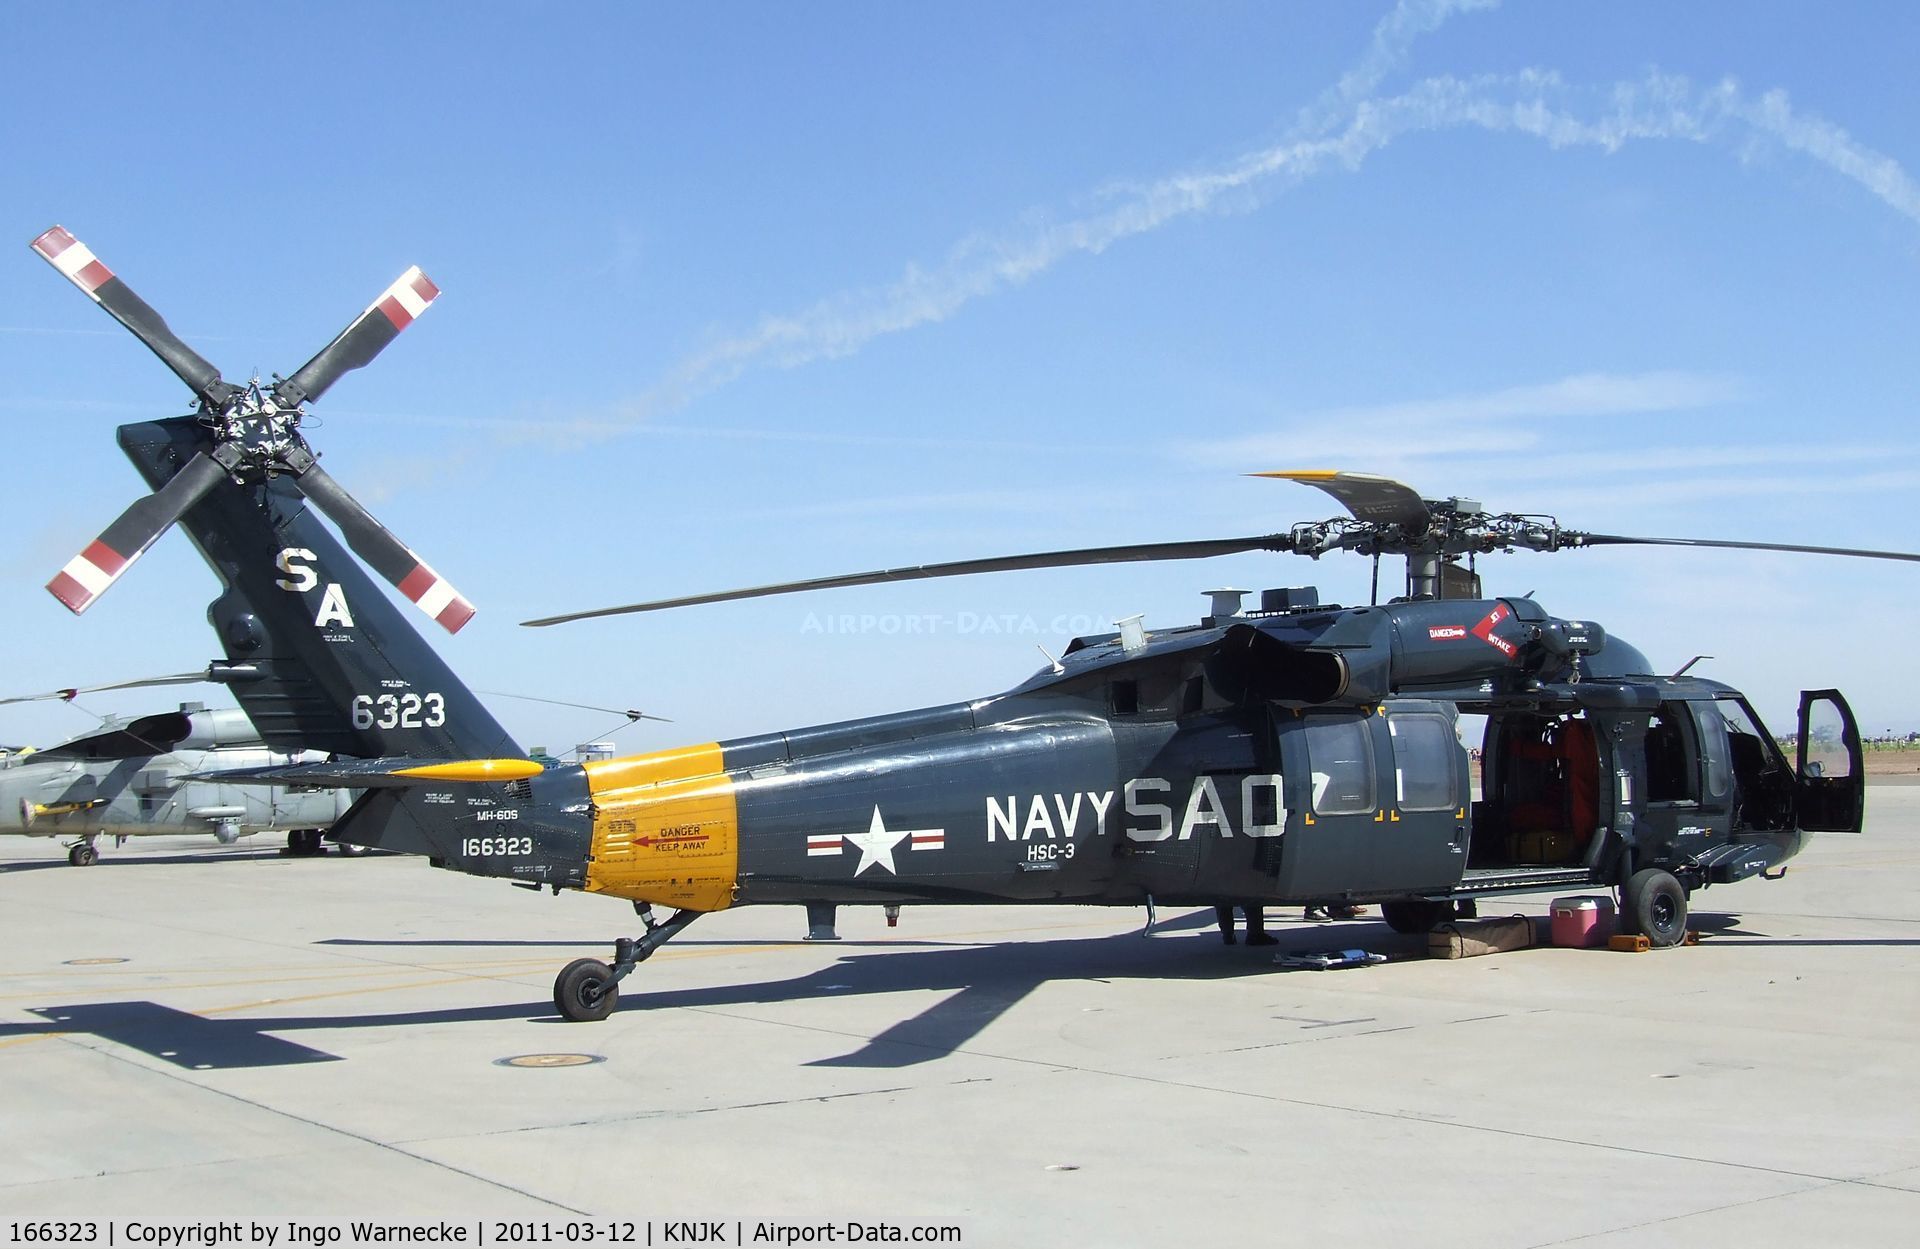 166323, Sikorsky MH-60S Knighthawk C/N 70-2832, Sikorsky MH-60S Seahawk / Knighthawk at the 2011 airshow at El Centro NAS, CA